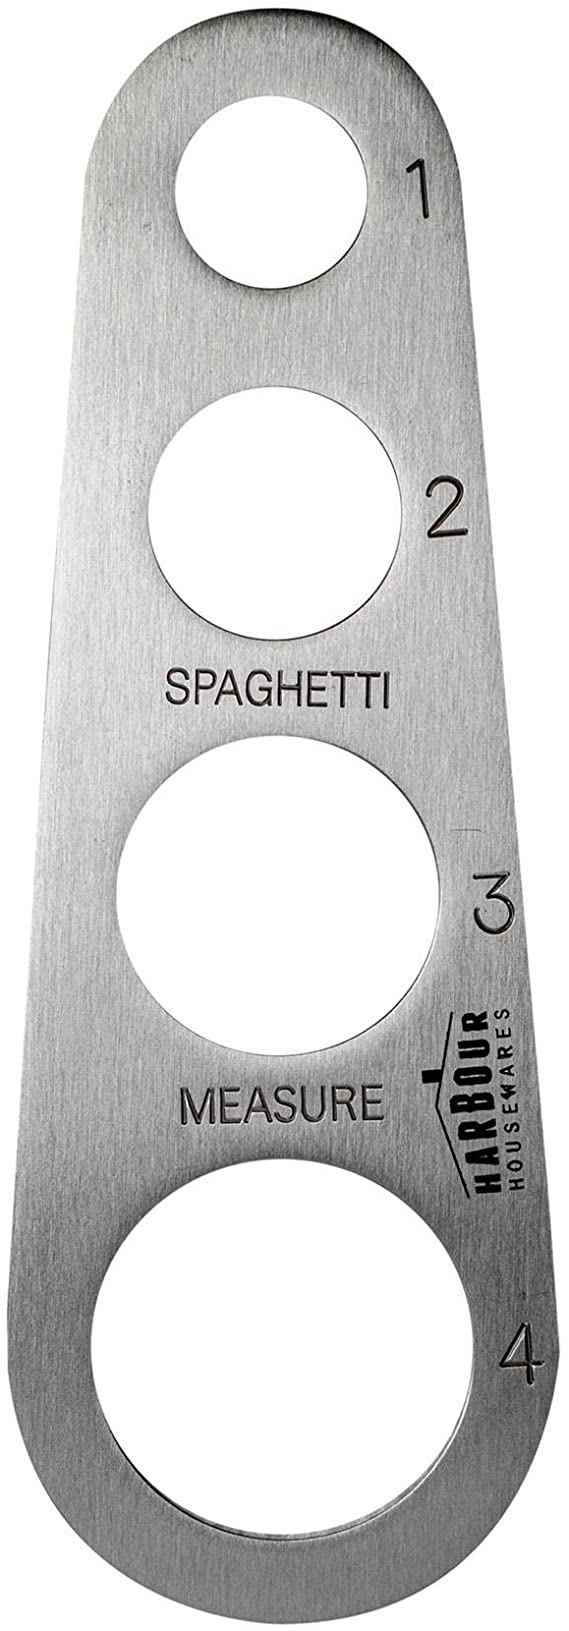 Spaghetti Measure - 1-4 adults - Stainless Steel